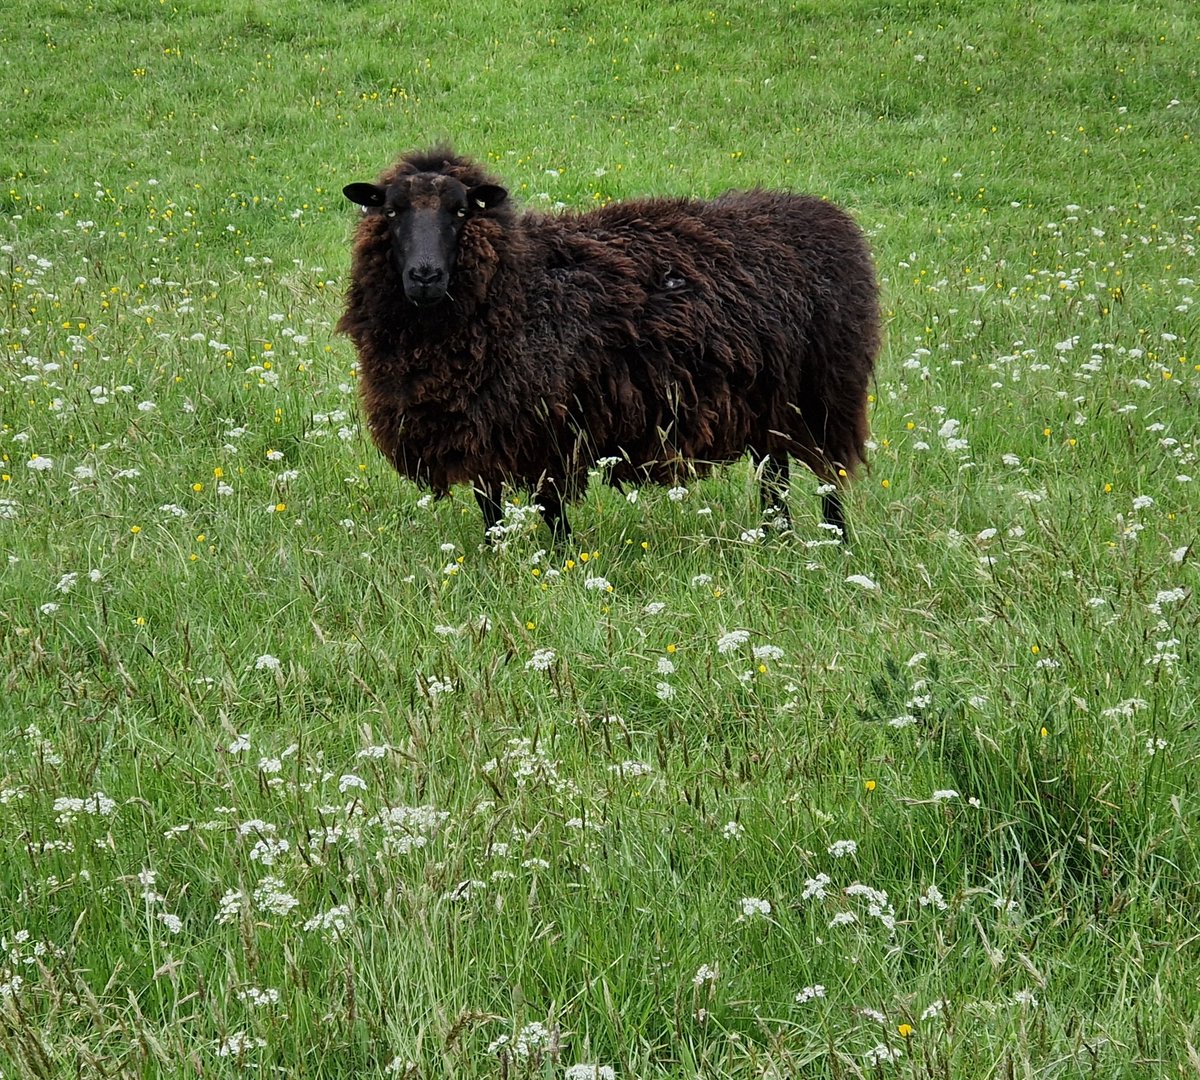 Scatty Sunny looking pretty in amongst the wild flowers.
Our fields are managed organically and are full of beneficial grasses, herbs and wild flowers 🌿🌱

#animalsanctuary #sheep #sheep365 #animallovers #foreverhome ##nonprofit #amazonwishlist #grass 

woollypatchworksheepsanctuary.uk